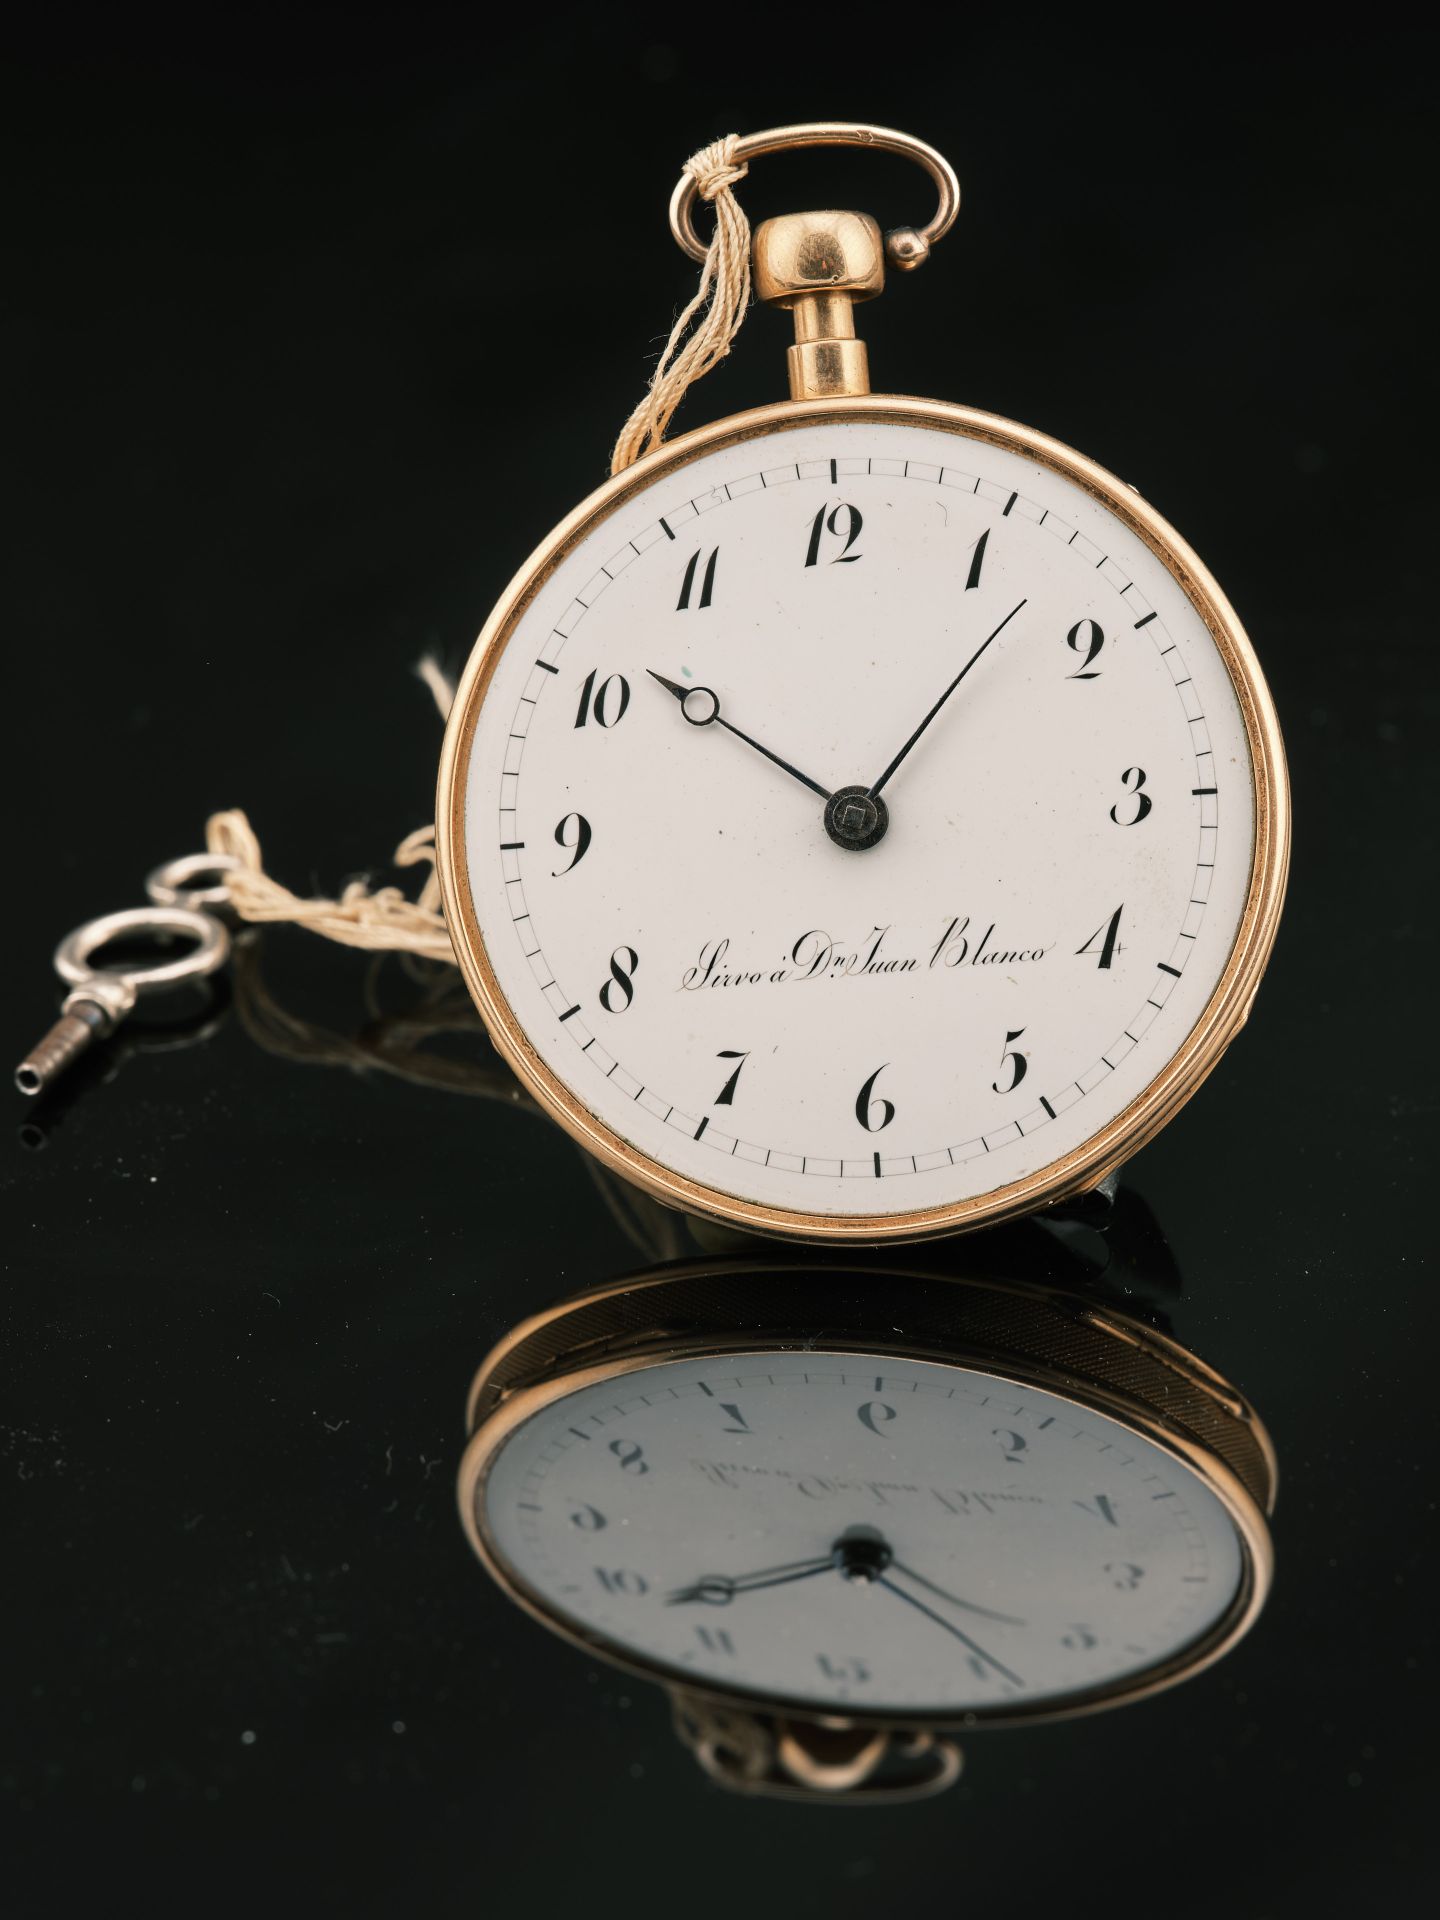 Null Sirvo to Dn. Juan Blanco

Pocket watch with repetitions in yellow gold 18K &hellip;